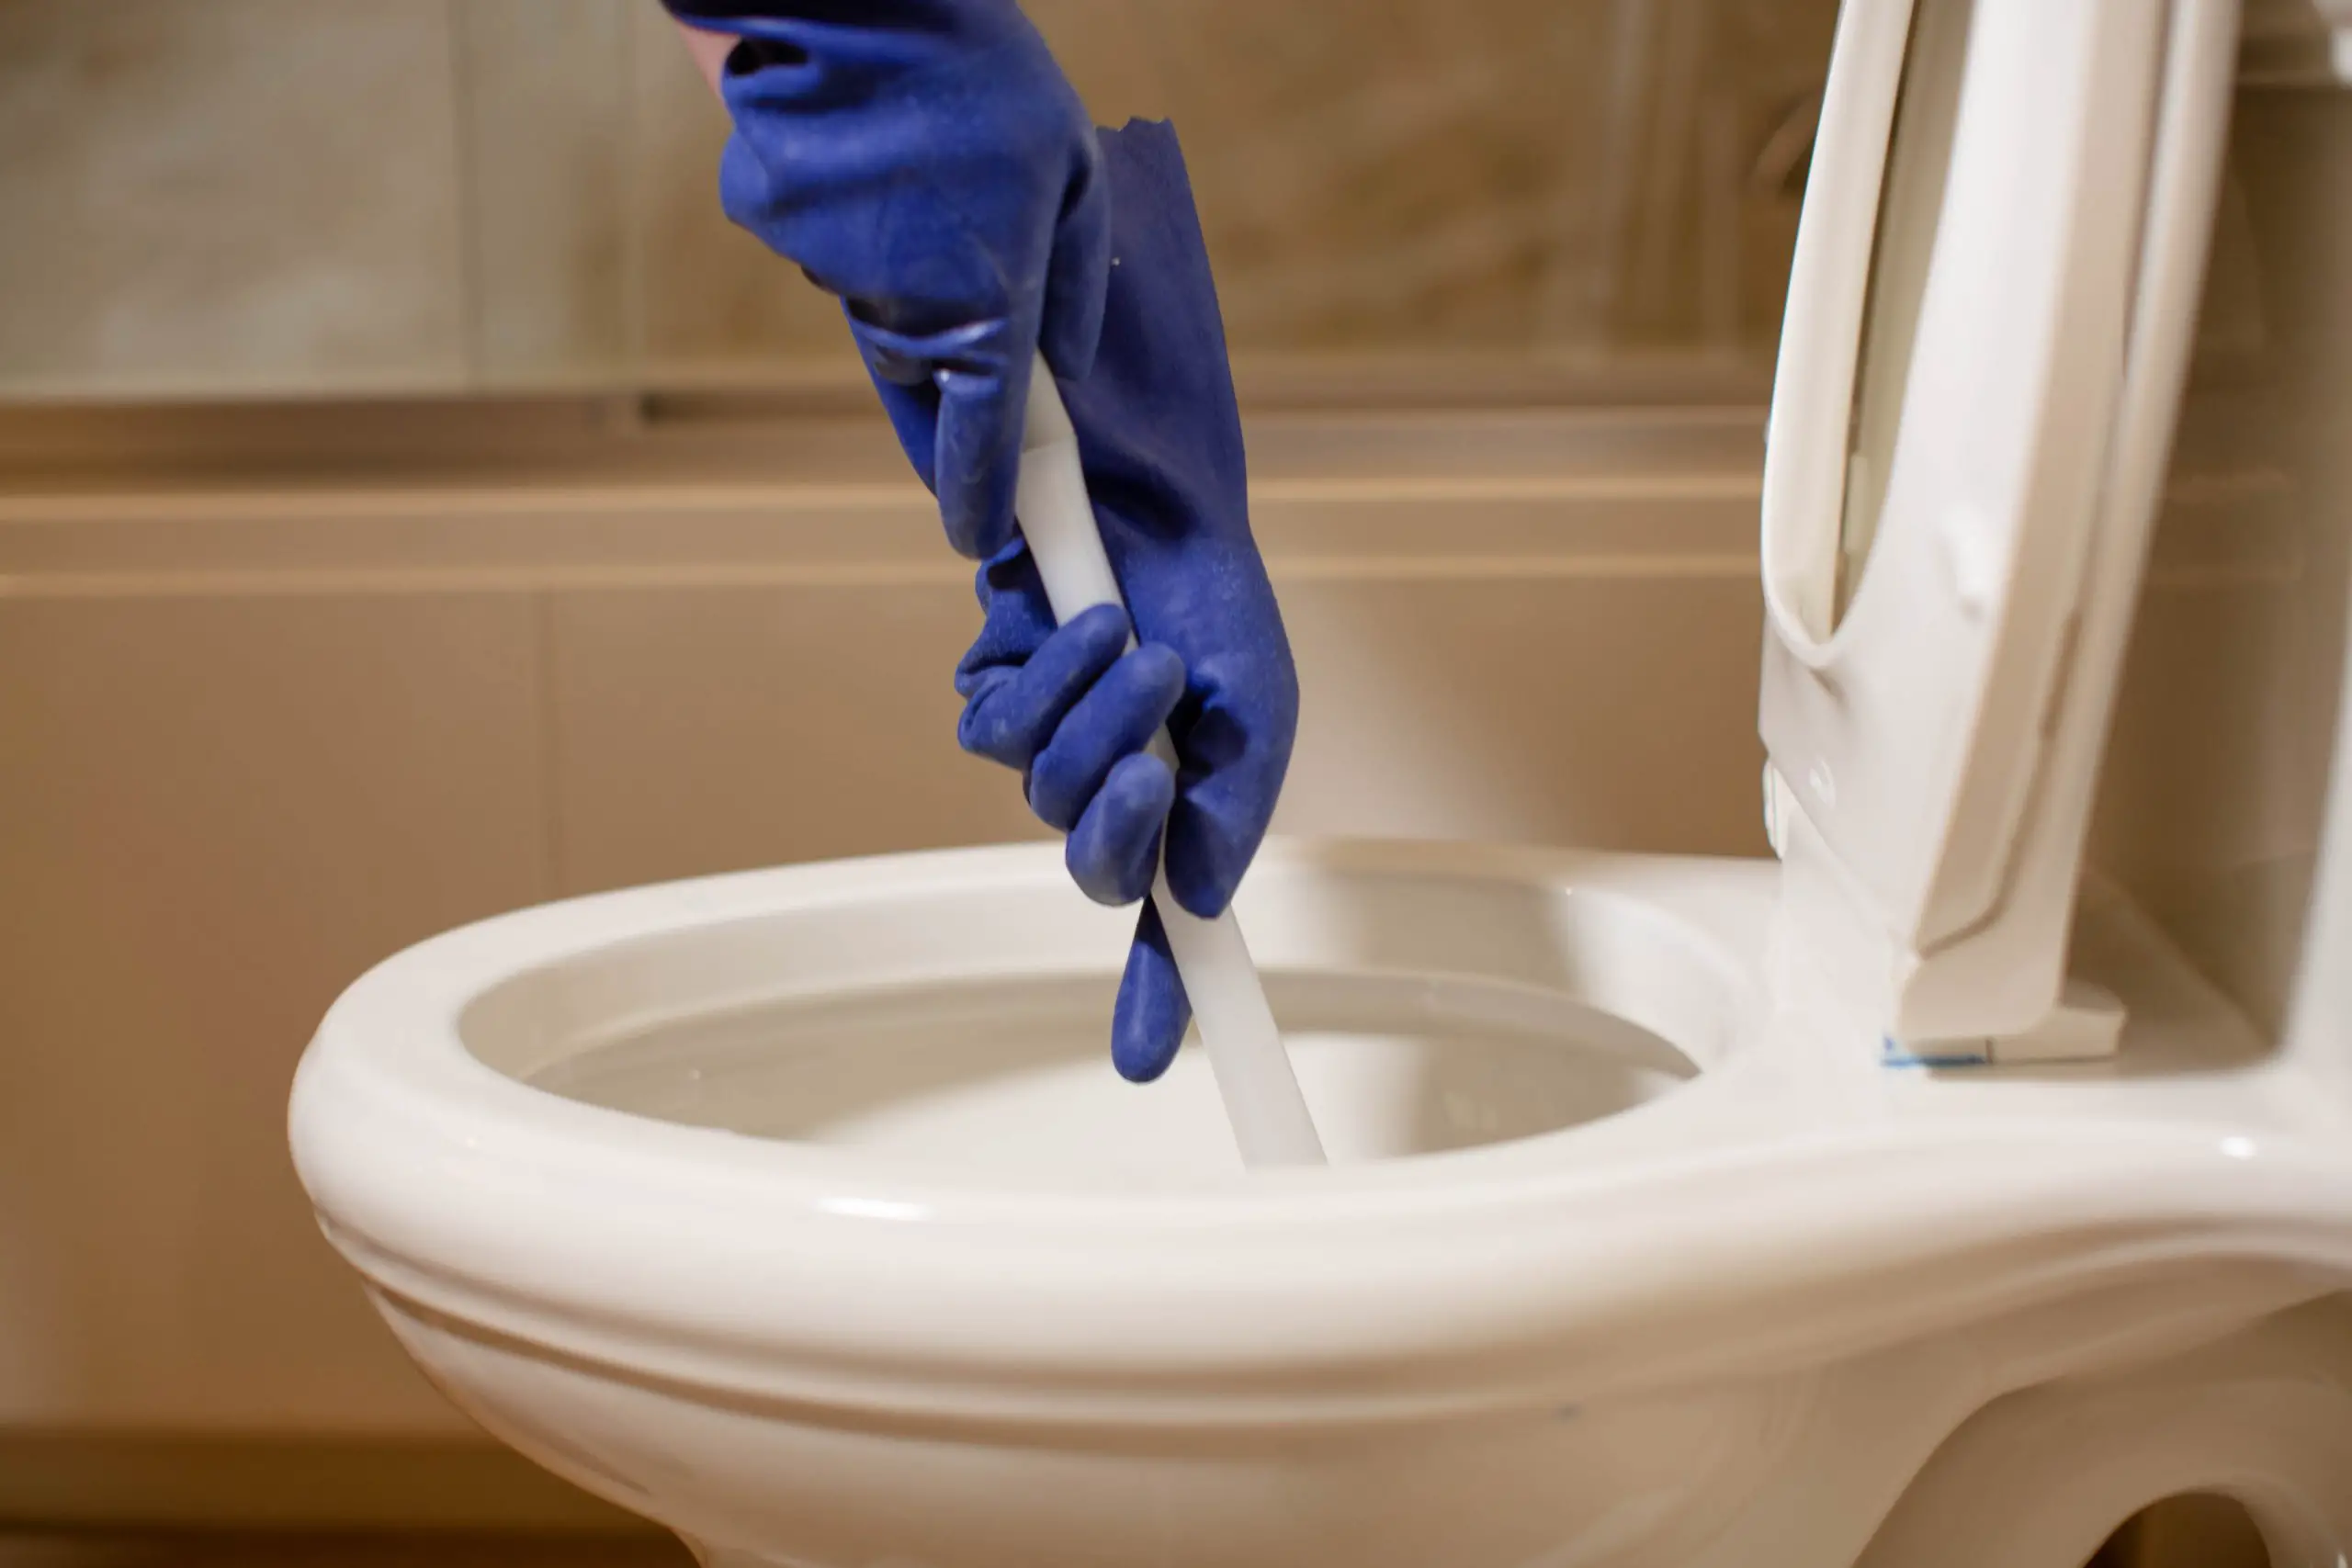 How to Fix a Toilet That Won't Flush (Unless You Hold the